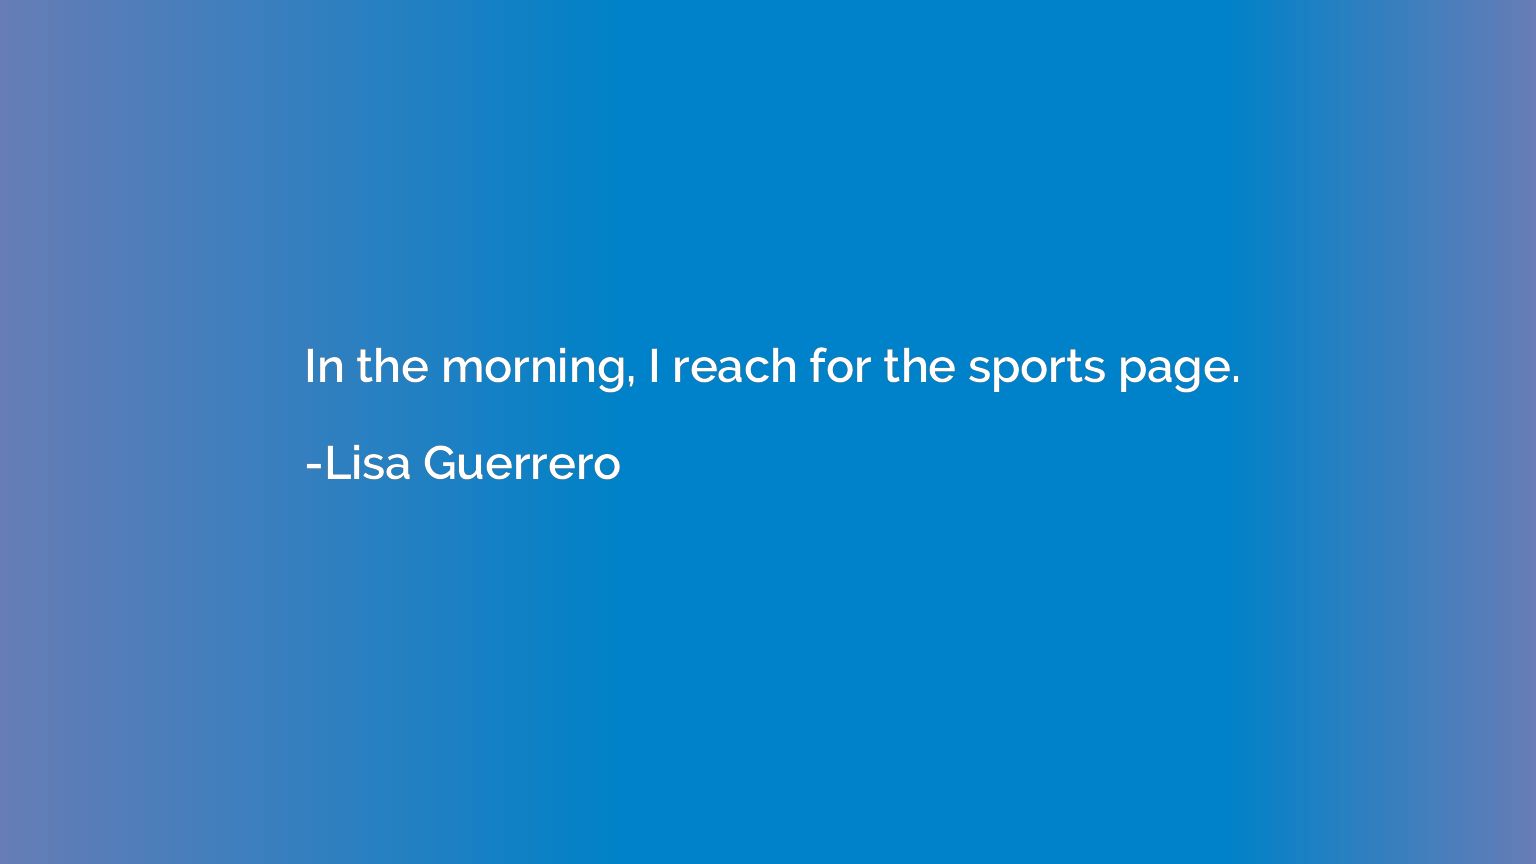 In the morning, I reach for the sports page.